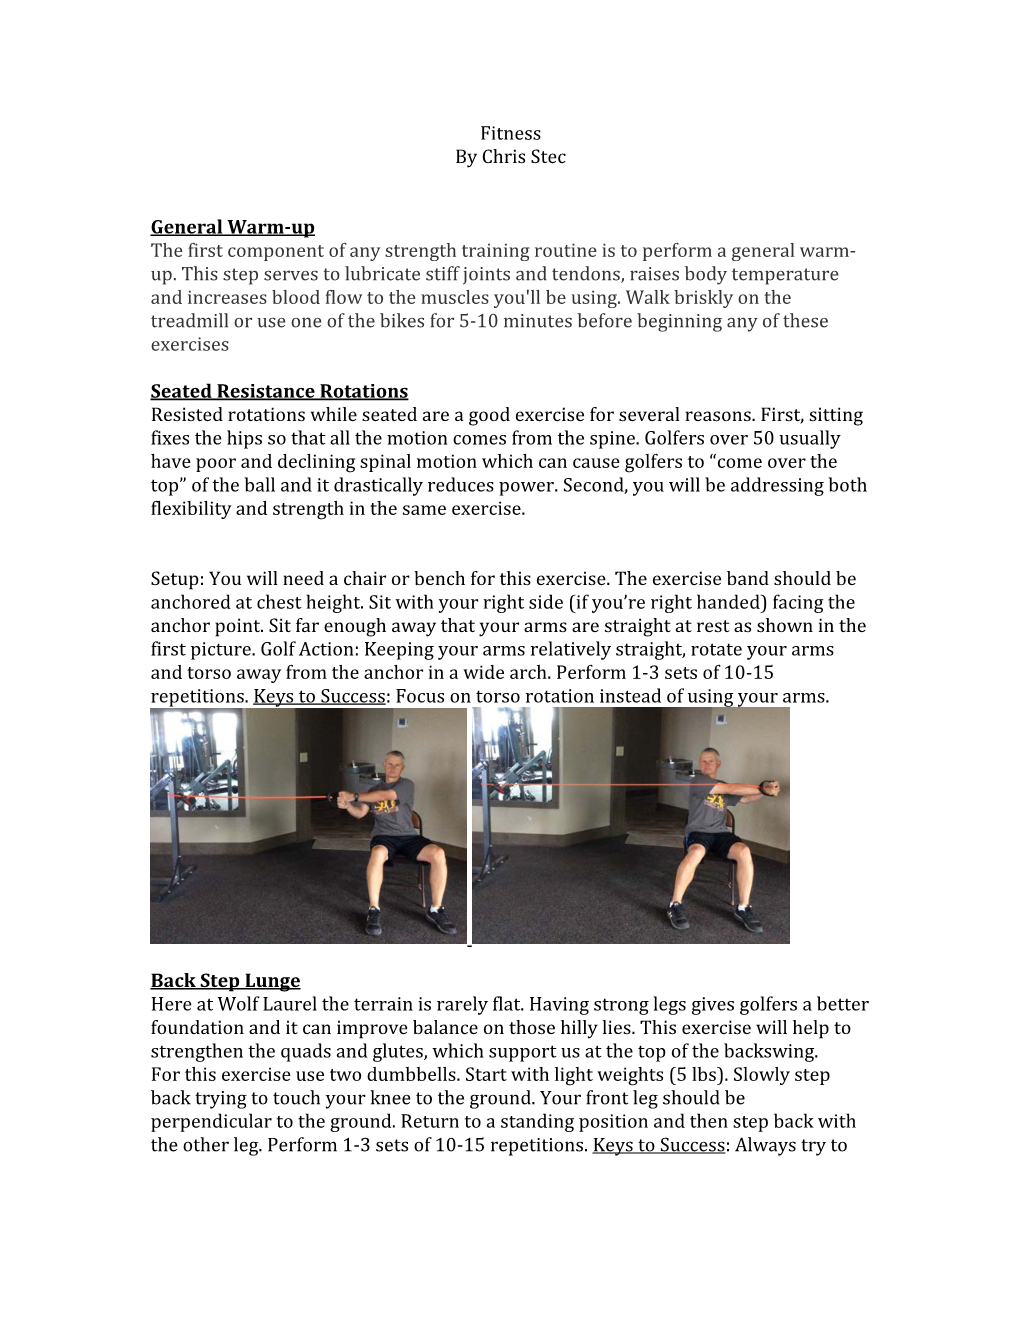 Fitness by Chris Stec General Warm-Up the First Component Of